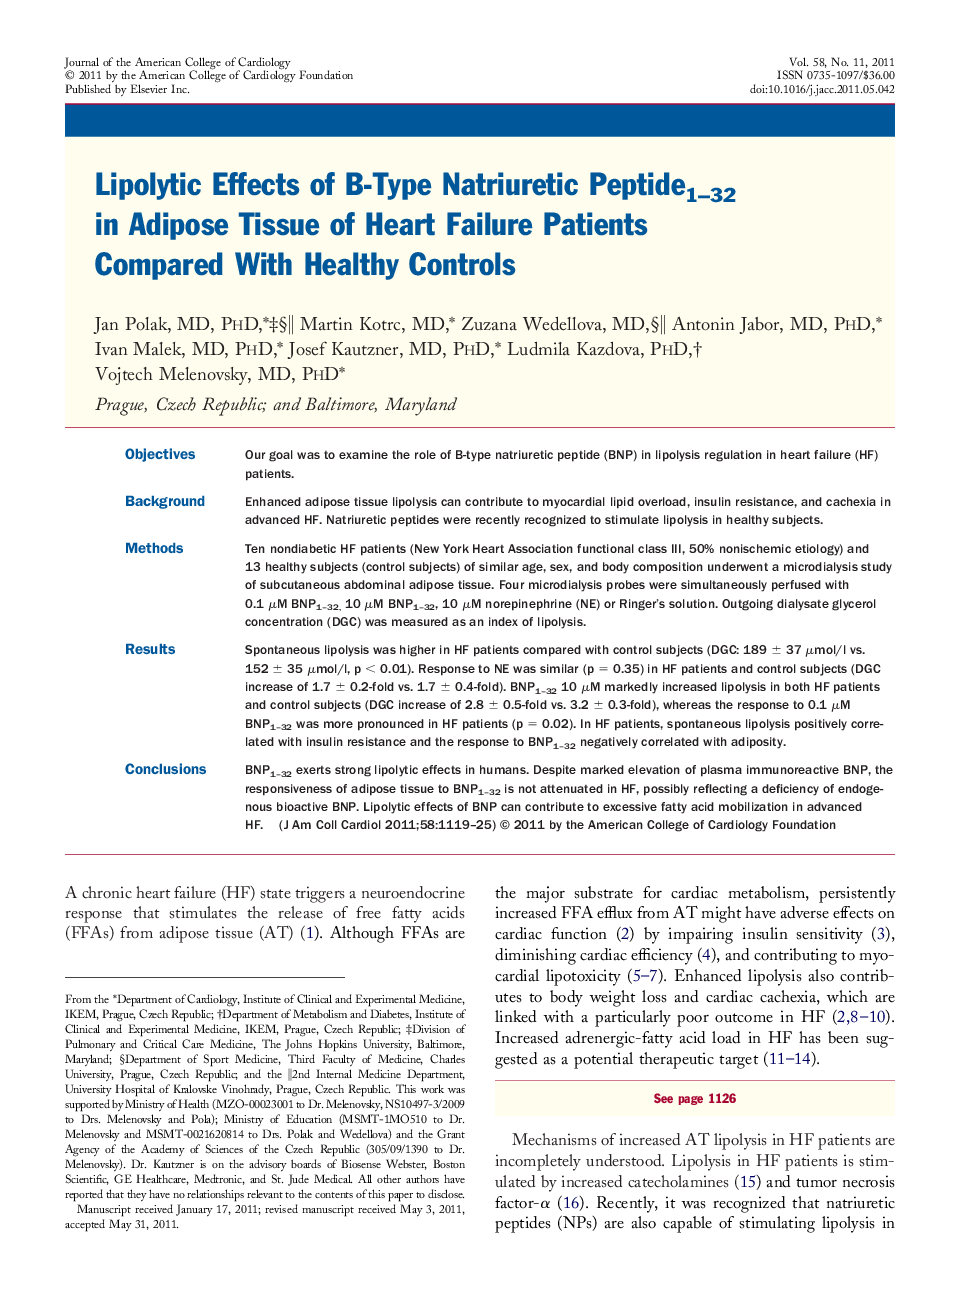 Lipolytic Effects of B-Type Natriuretic Peptide1–32 in Adipose Tissue of Heart Failure Patients Compared With Healthy Controls 